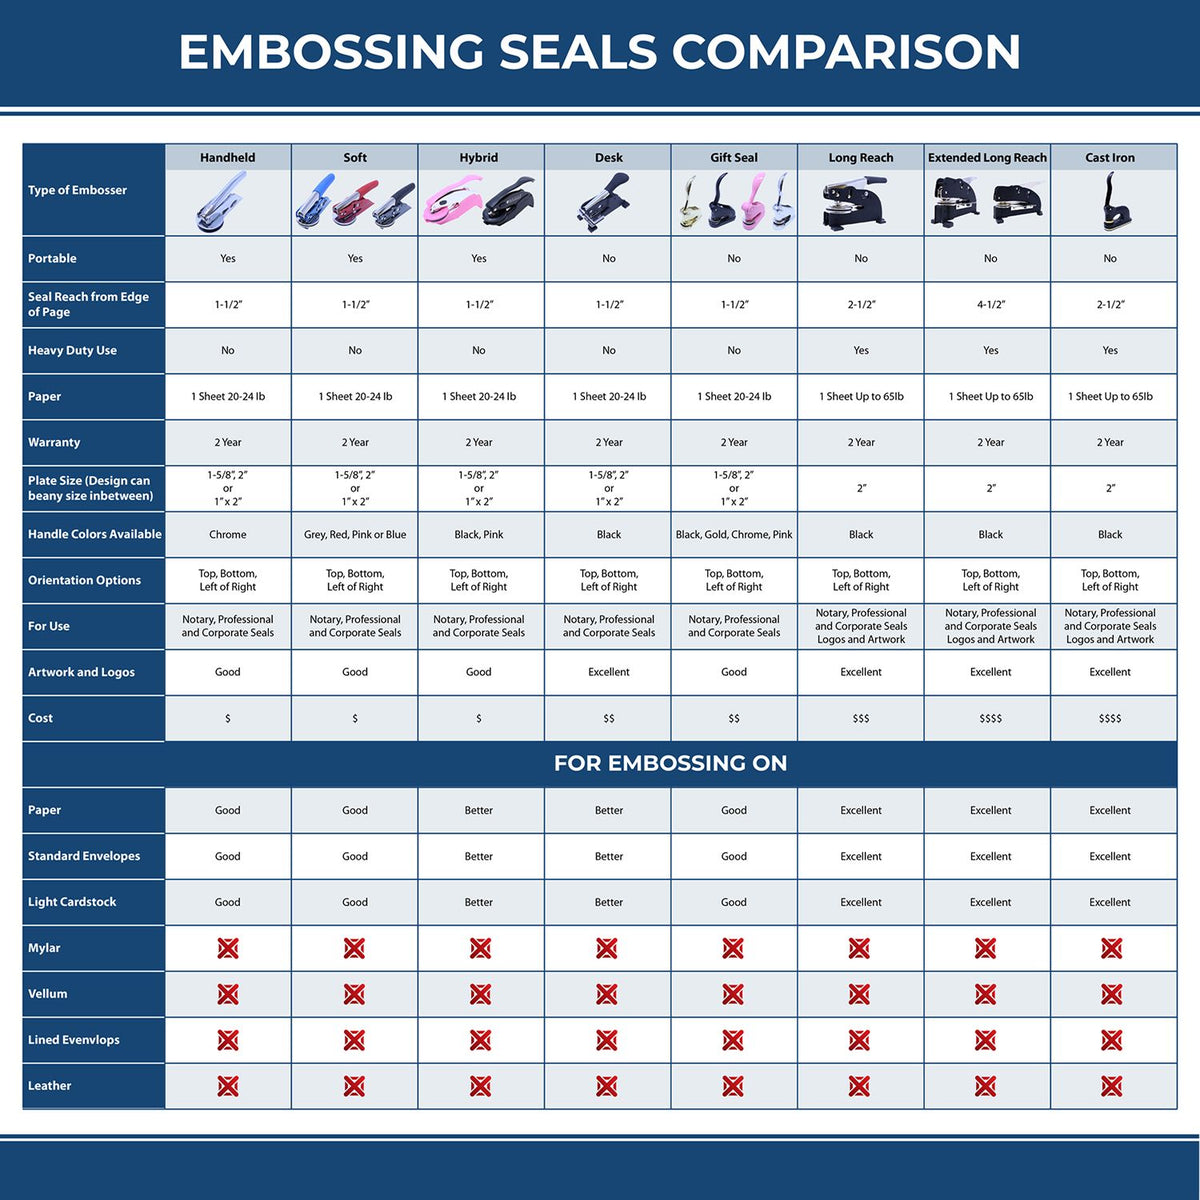 A comparison chart for the different types of mount models available for the Hybrid Missouri Architect Seal